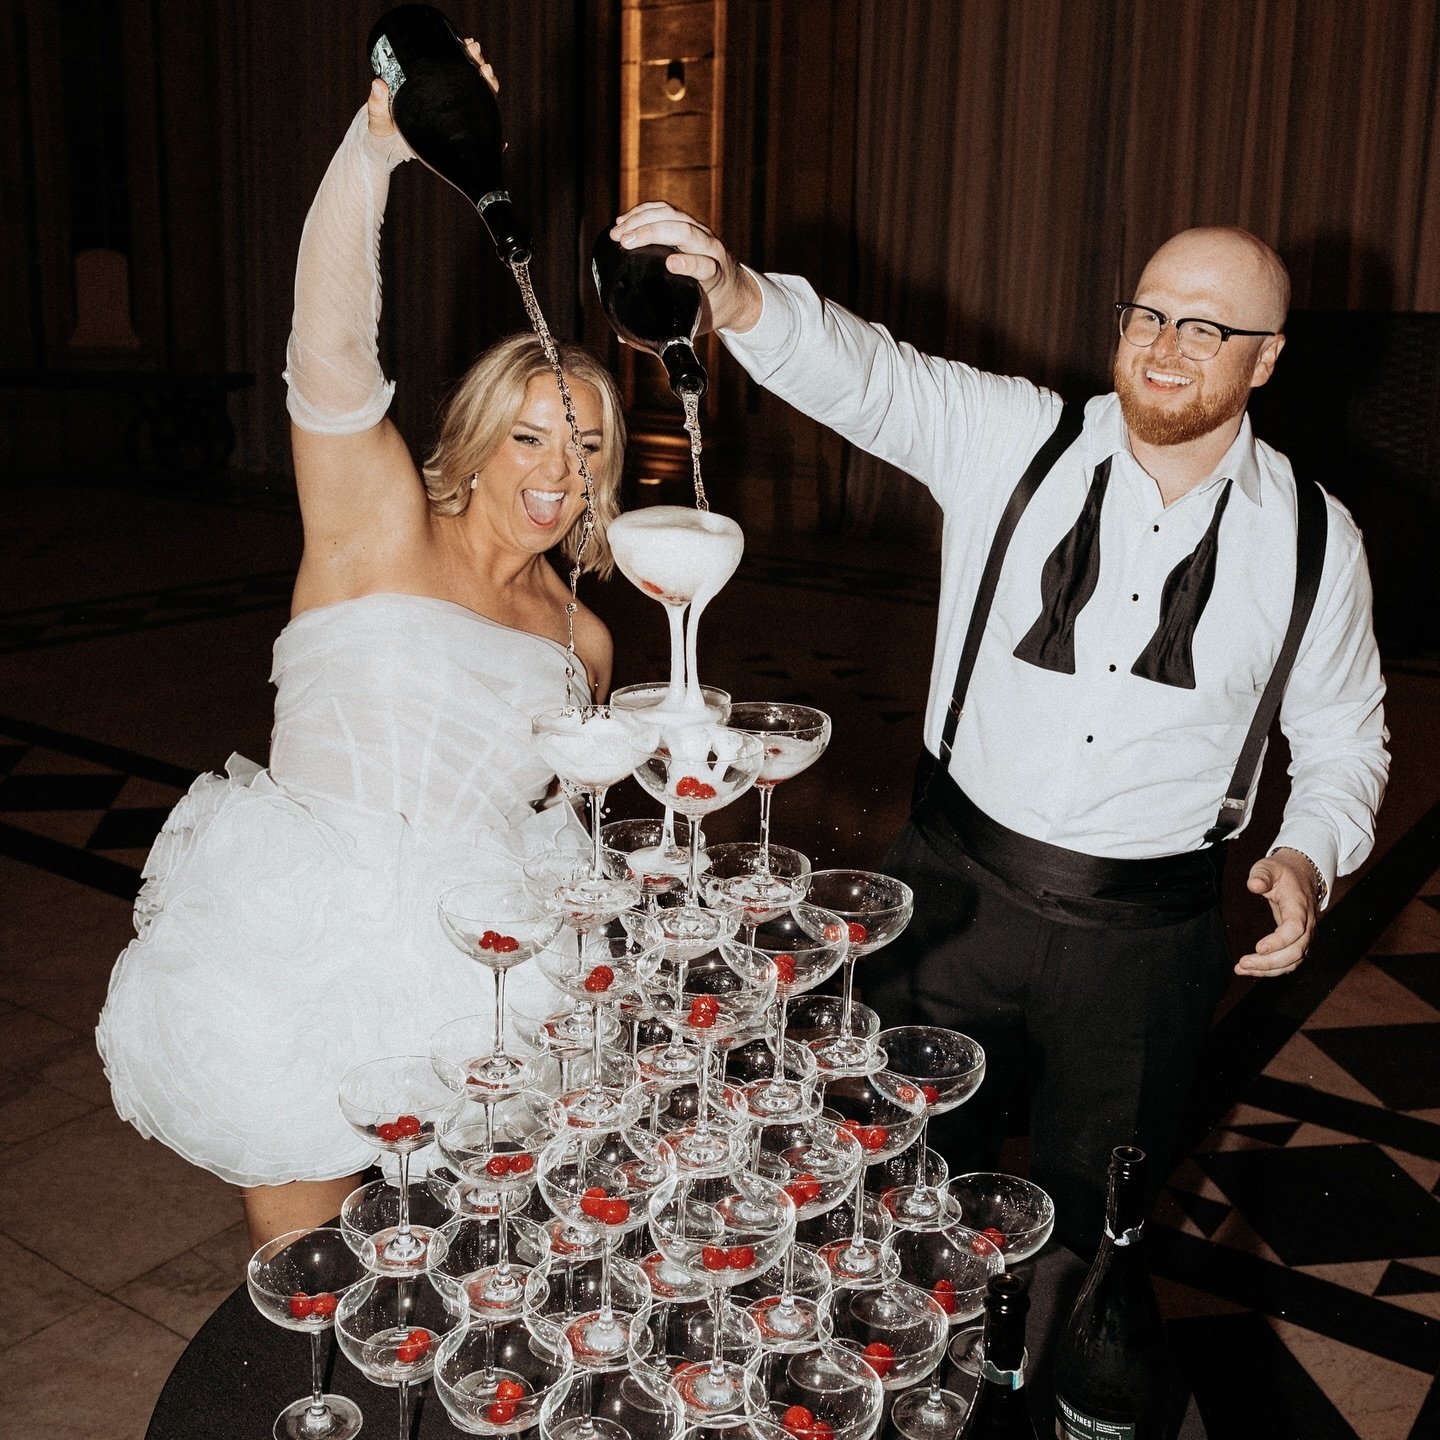 The most amount of fun and party all wrapped up in one couple! When it comes to a wedding day in Pittsburgh, the Pennsylvanian knows how to rock!